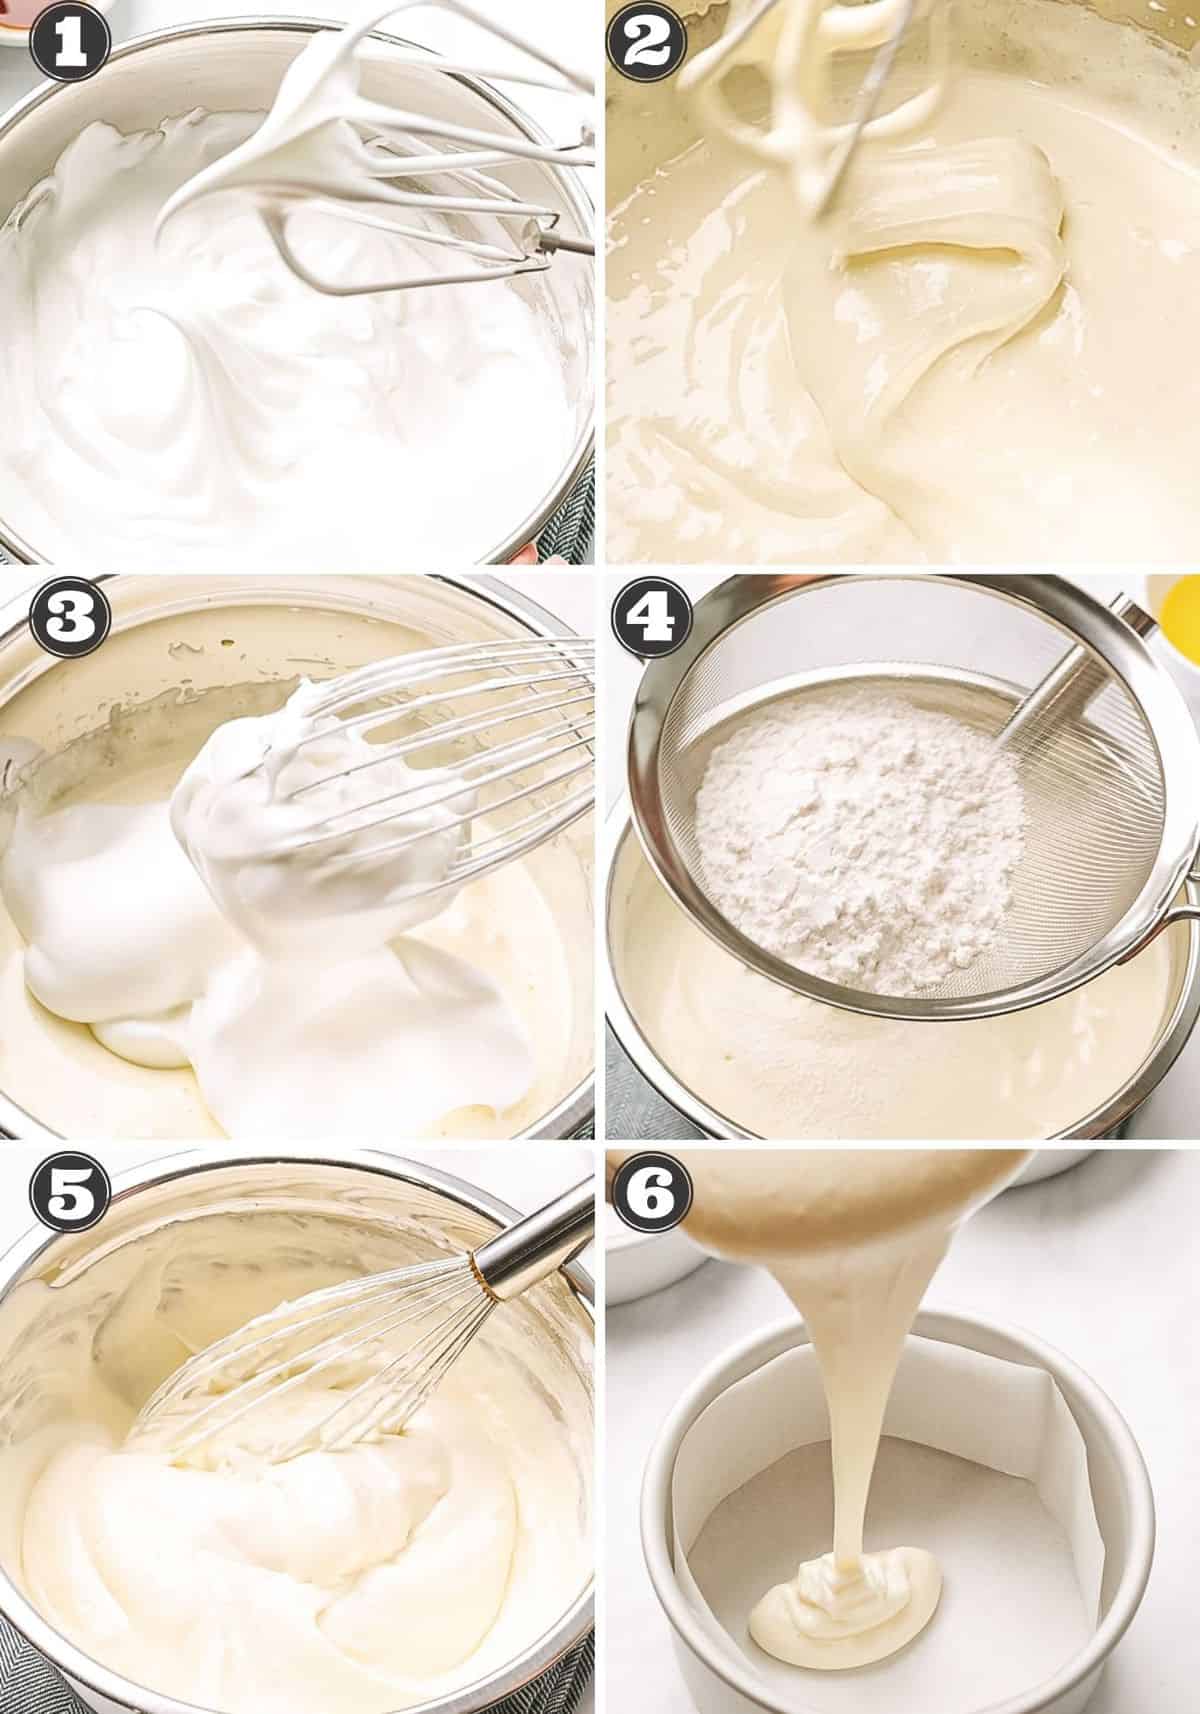 Step by step photo instructions for how to make a sponge cake.